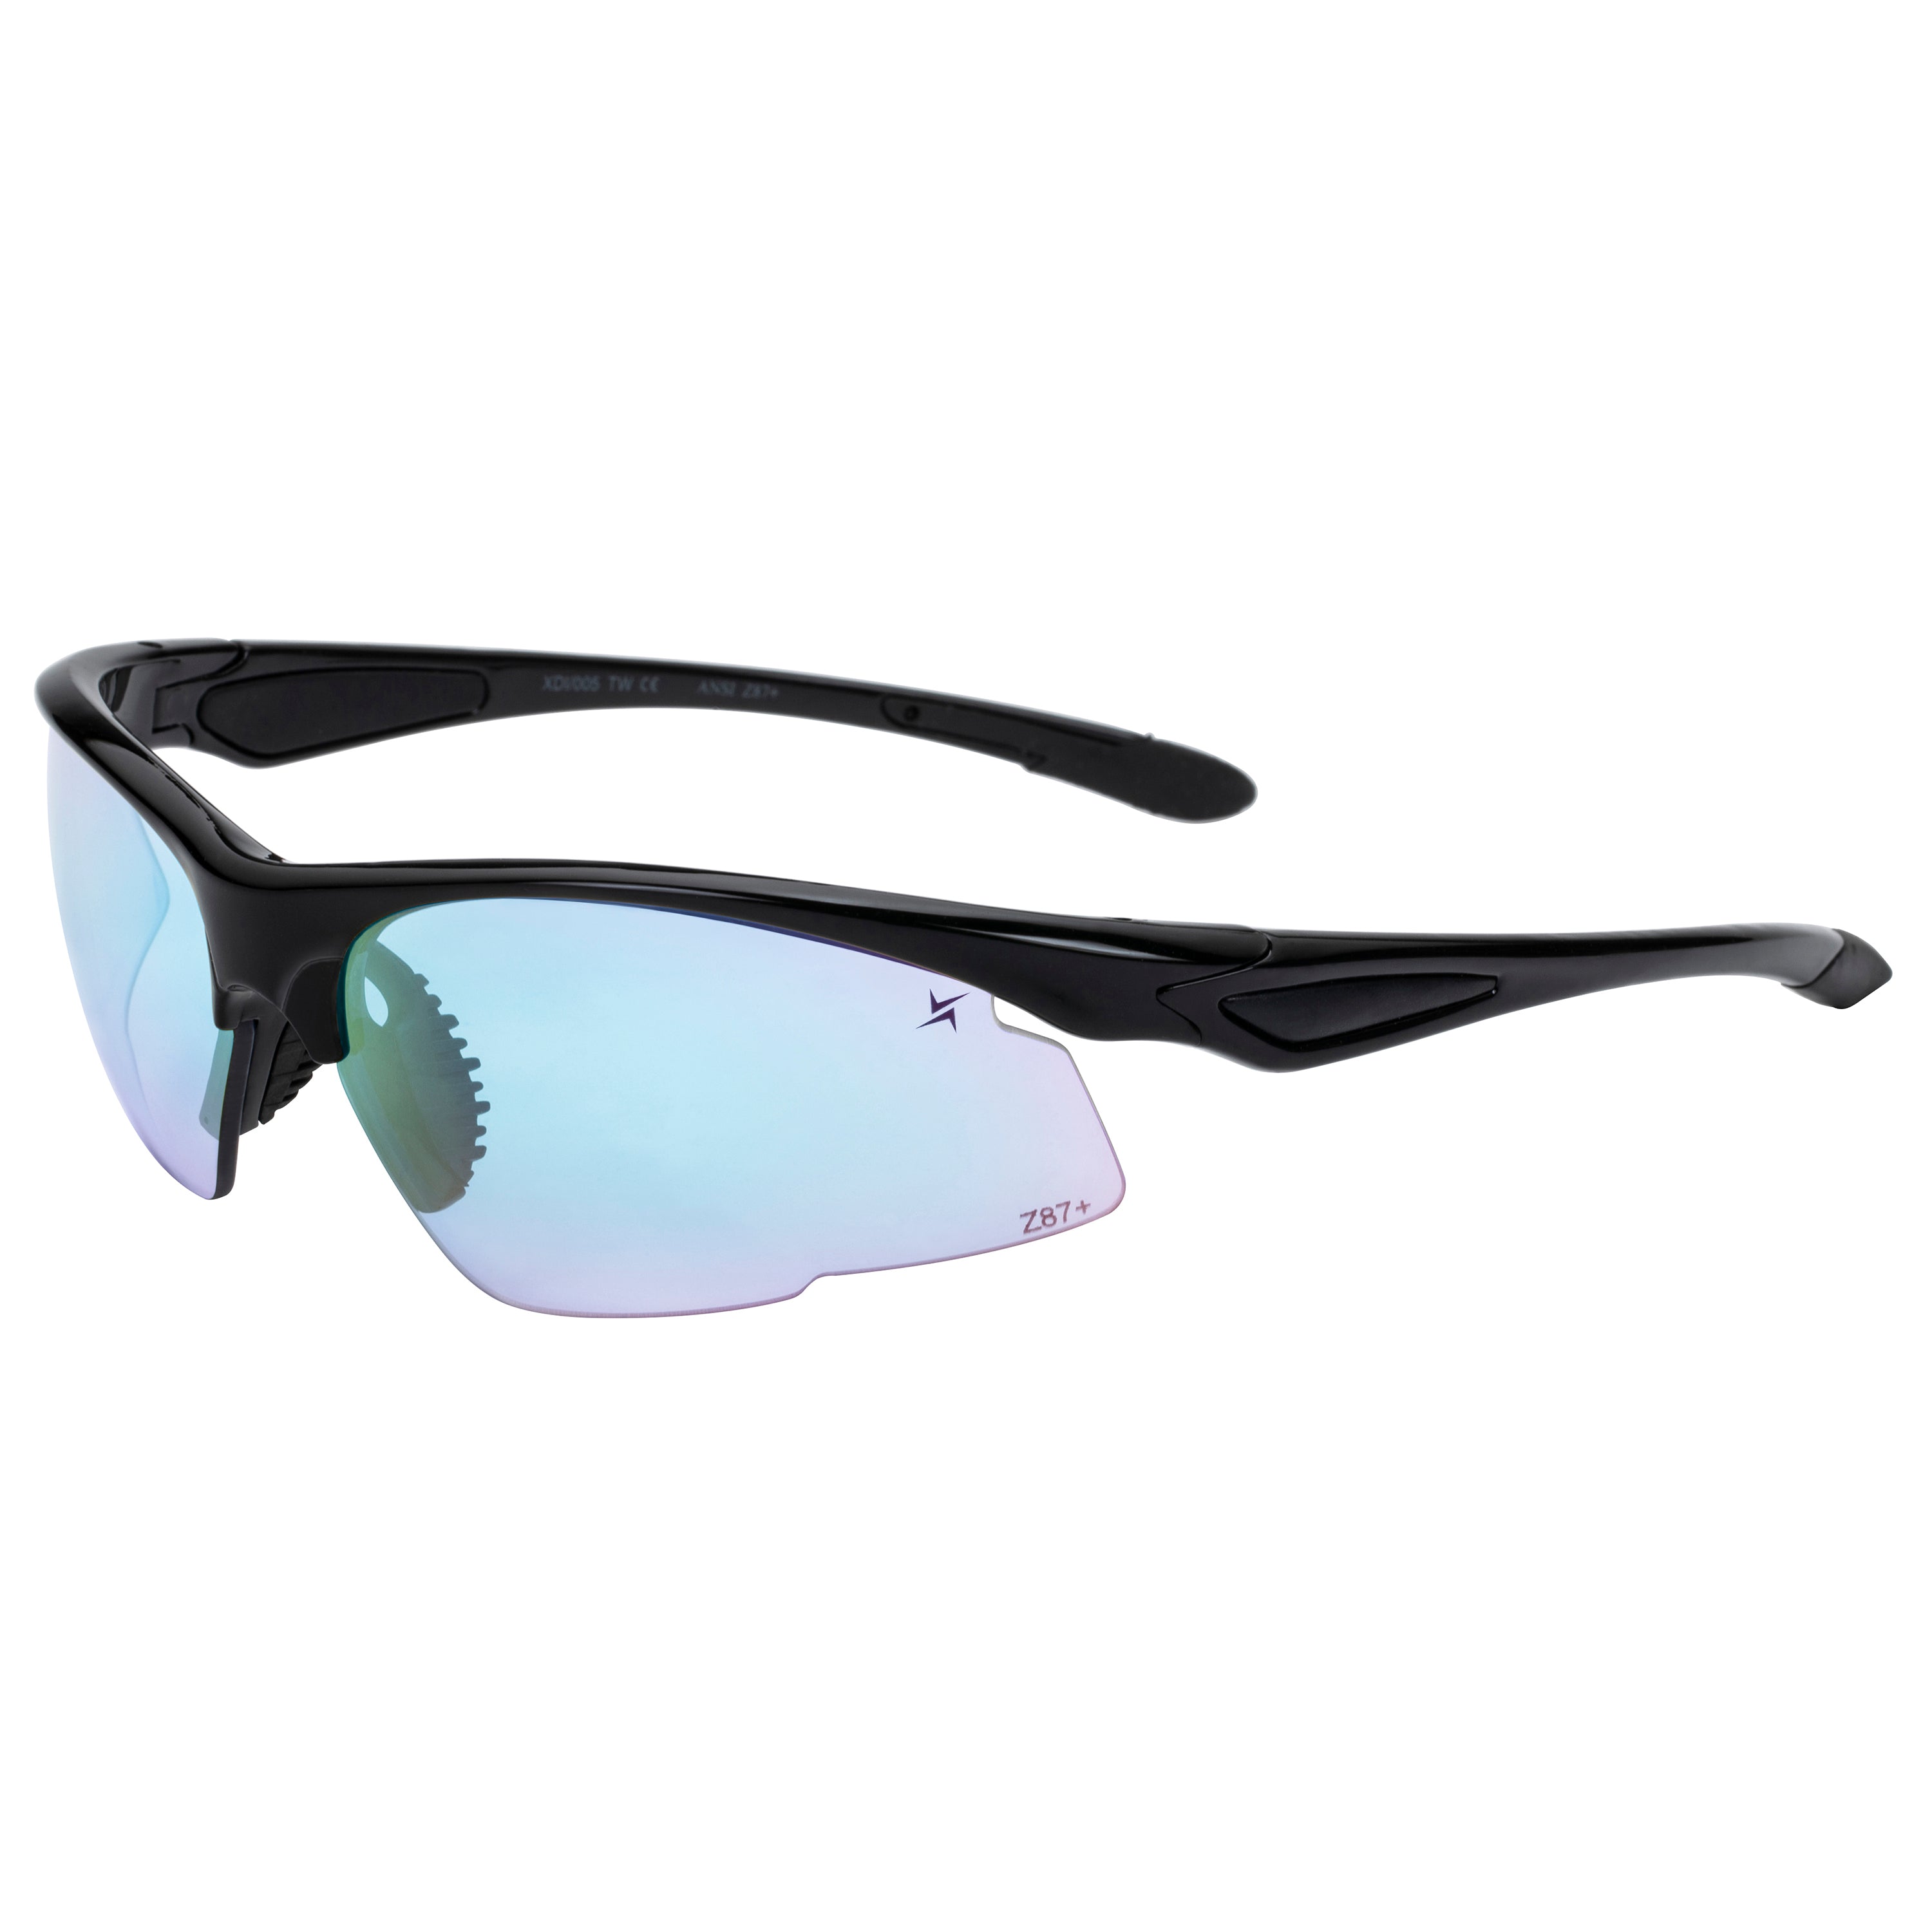 Clear to Grey Photochromic Lens with Blue Mirror Coating Black Half Frame Wrap Around Sport Safety Sunglasses.